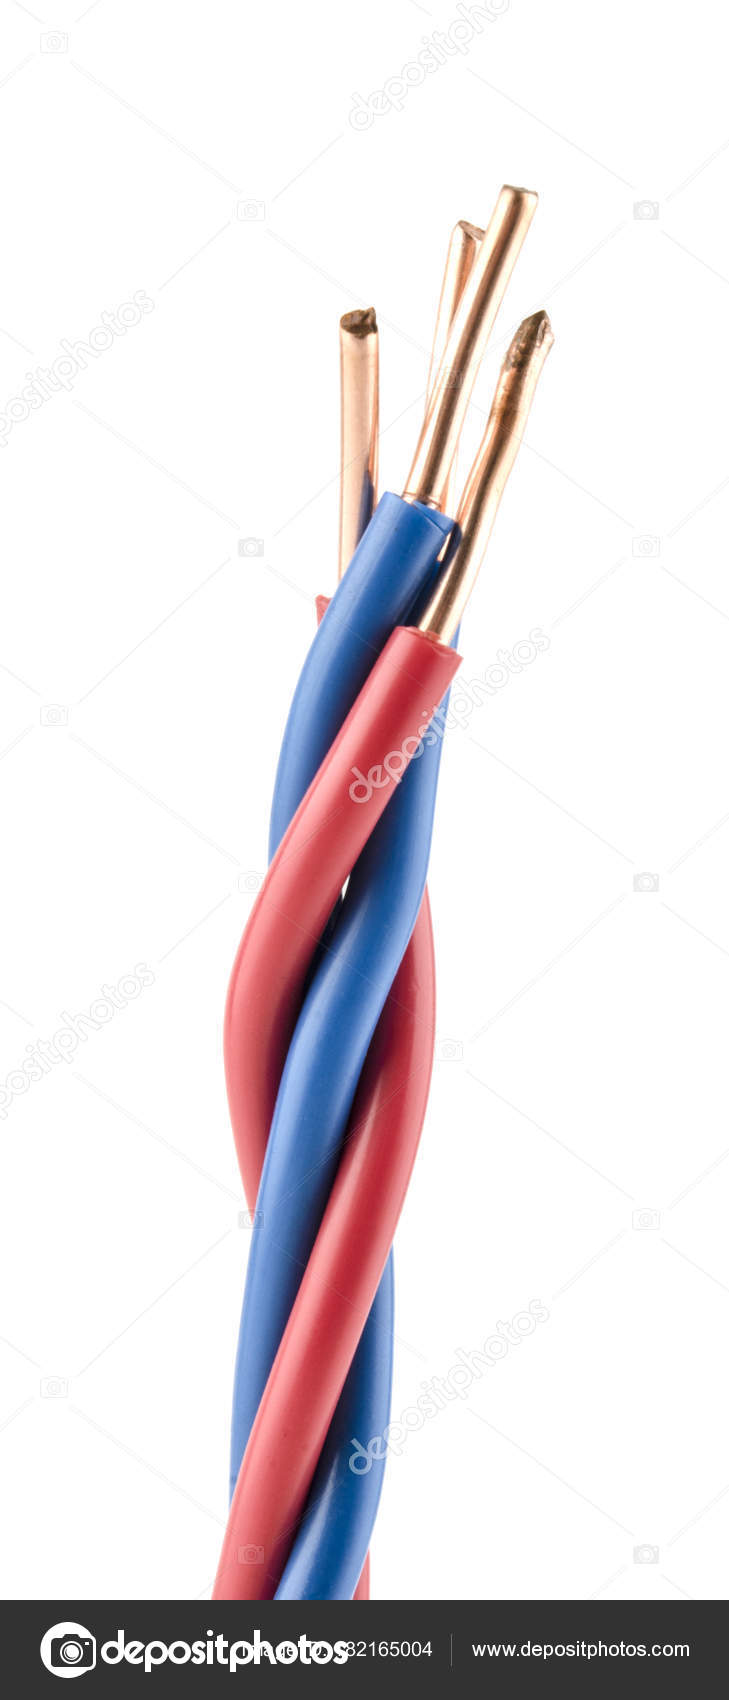 Red And Blue Wires Isolated On White Background Stock Photo Image By C Hammann1982 Gmail Com 182165004